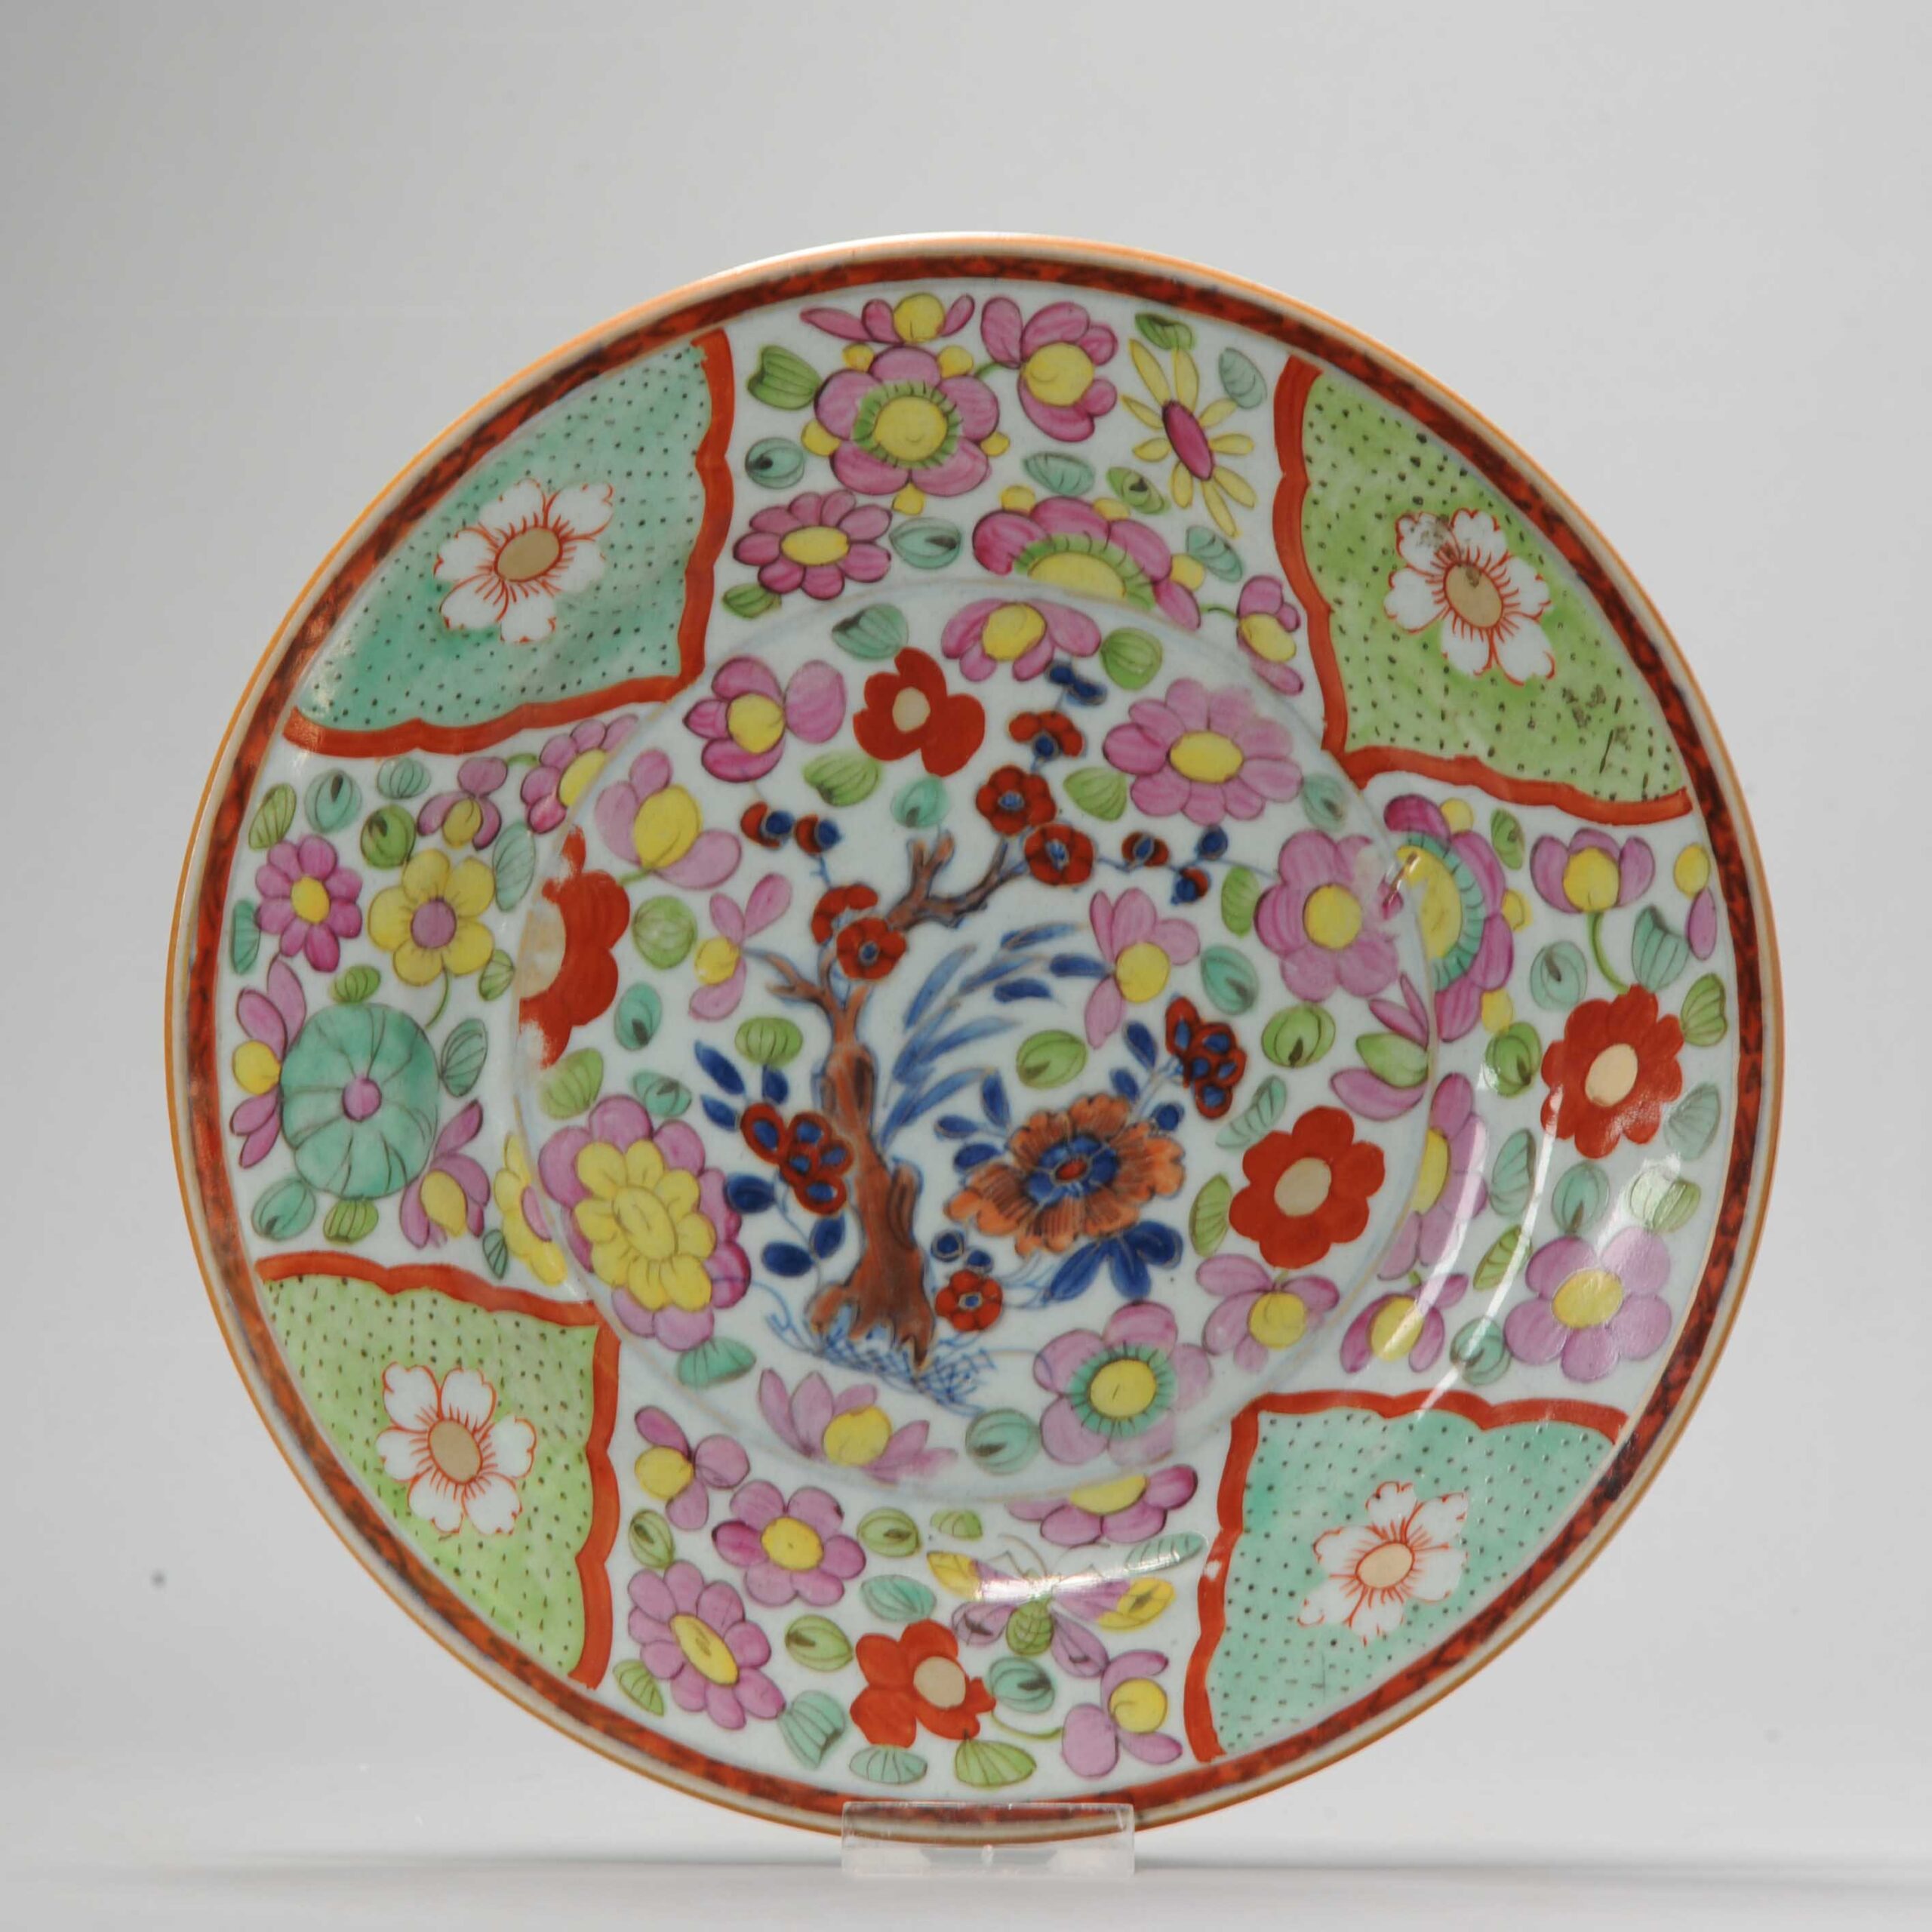 1115 Very nice decorated clobbered plate. Decorated with a underglaze in China. Overglaze red, purple, yellow and green